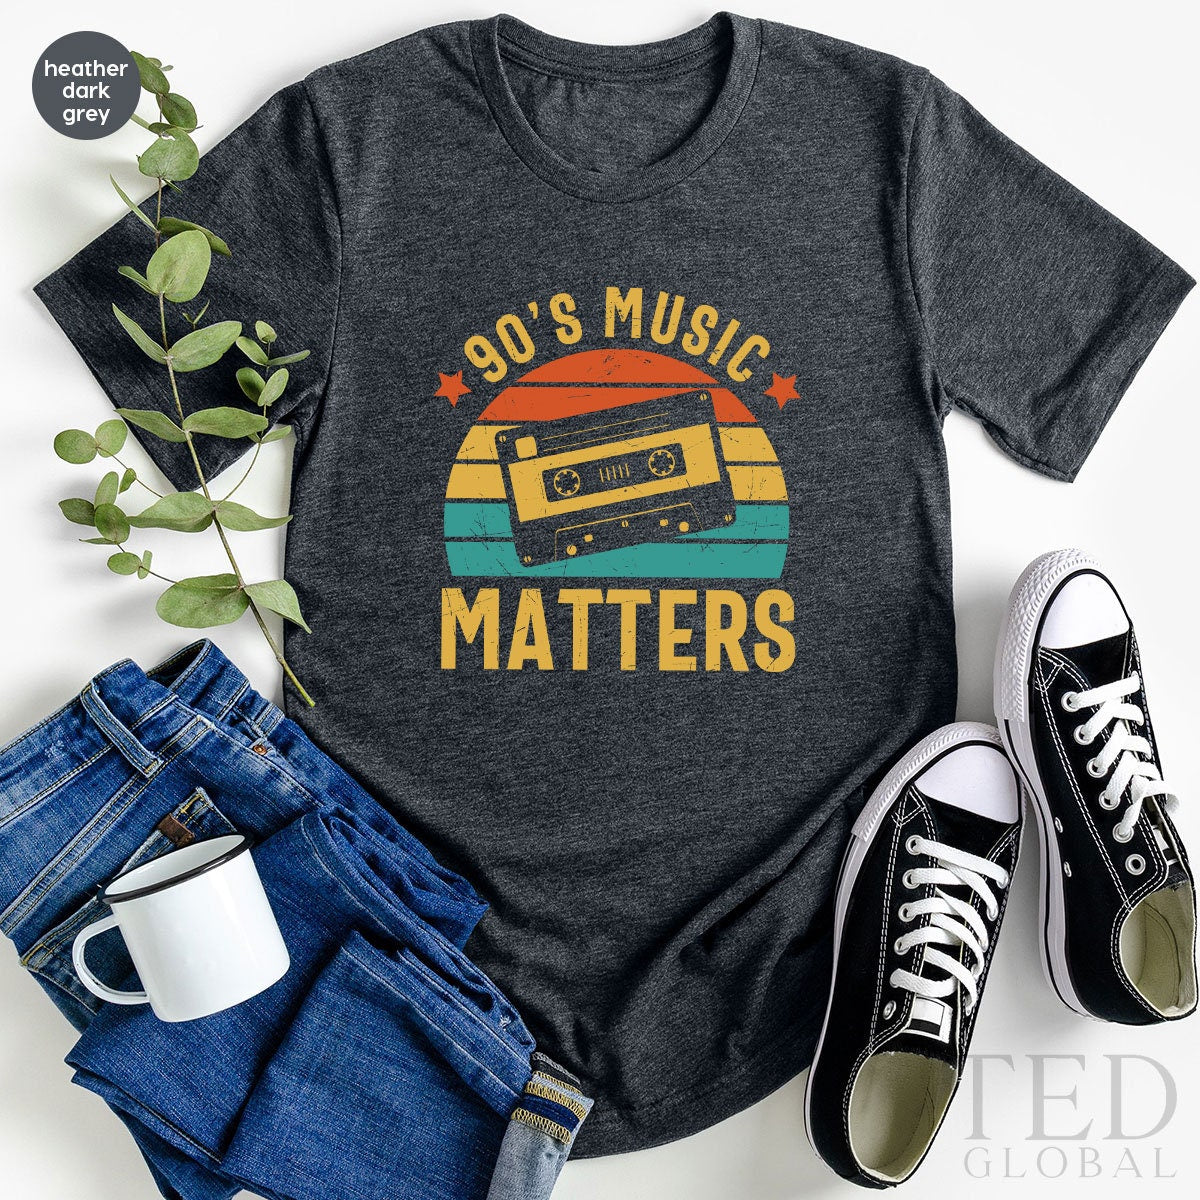 Cute 90's Music Matters T-Shirt, Vintage 90's Music T Shirt, Funny 90's Music Shirt, Historical Shirts, Tape Shirt, Gift For 90's Birthday - Fastdeliverytees.com